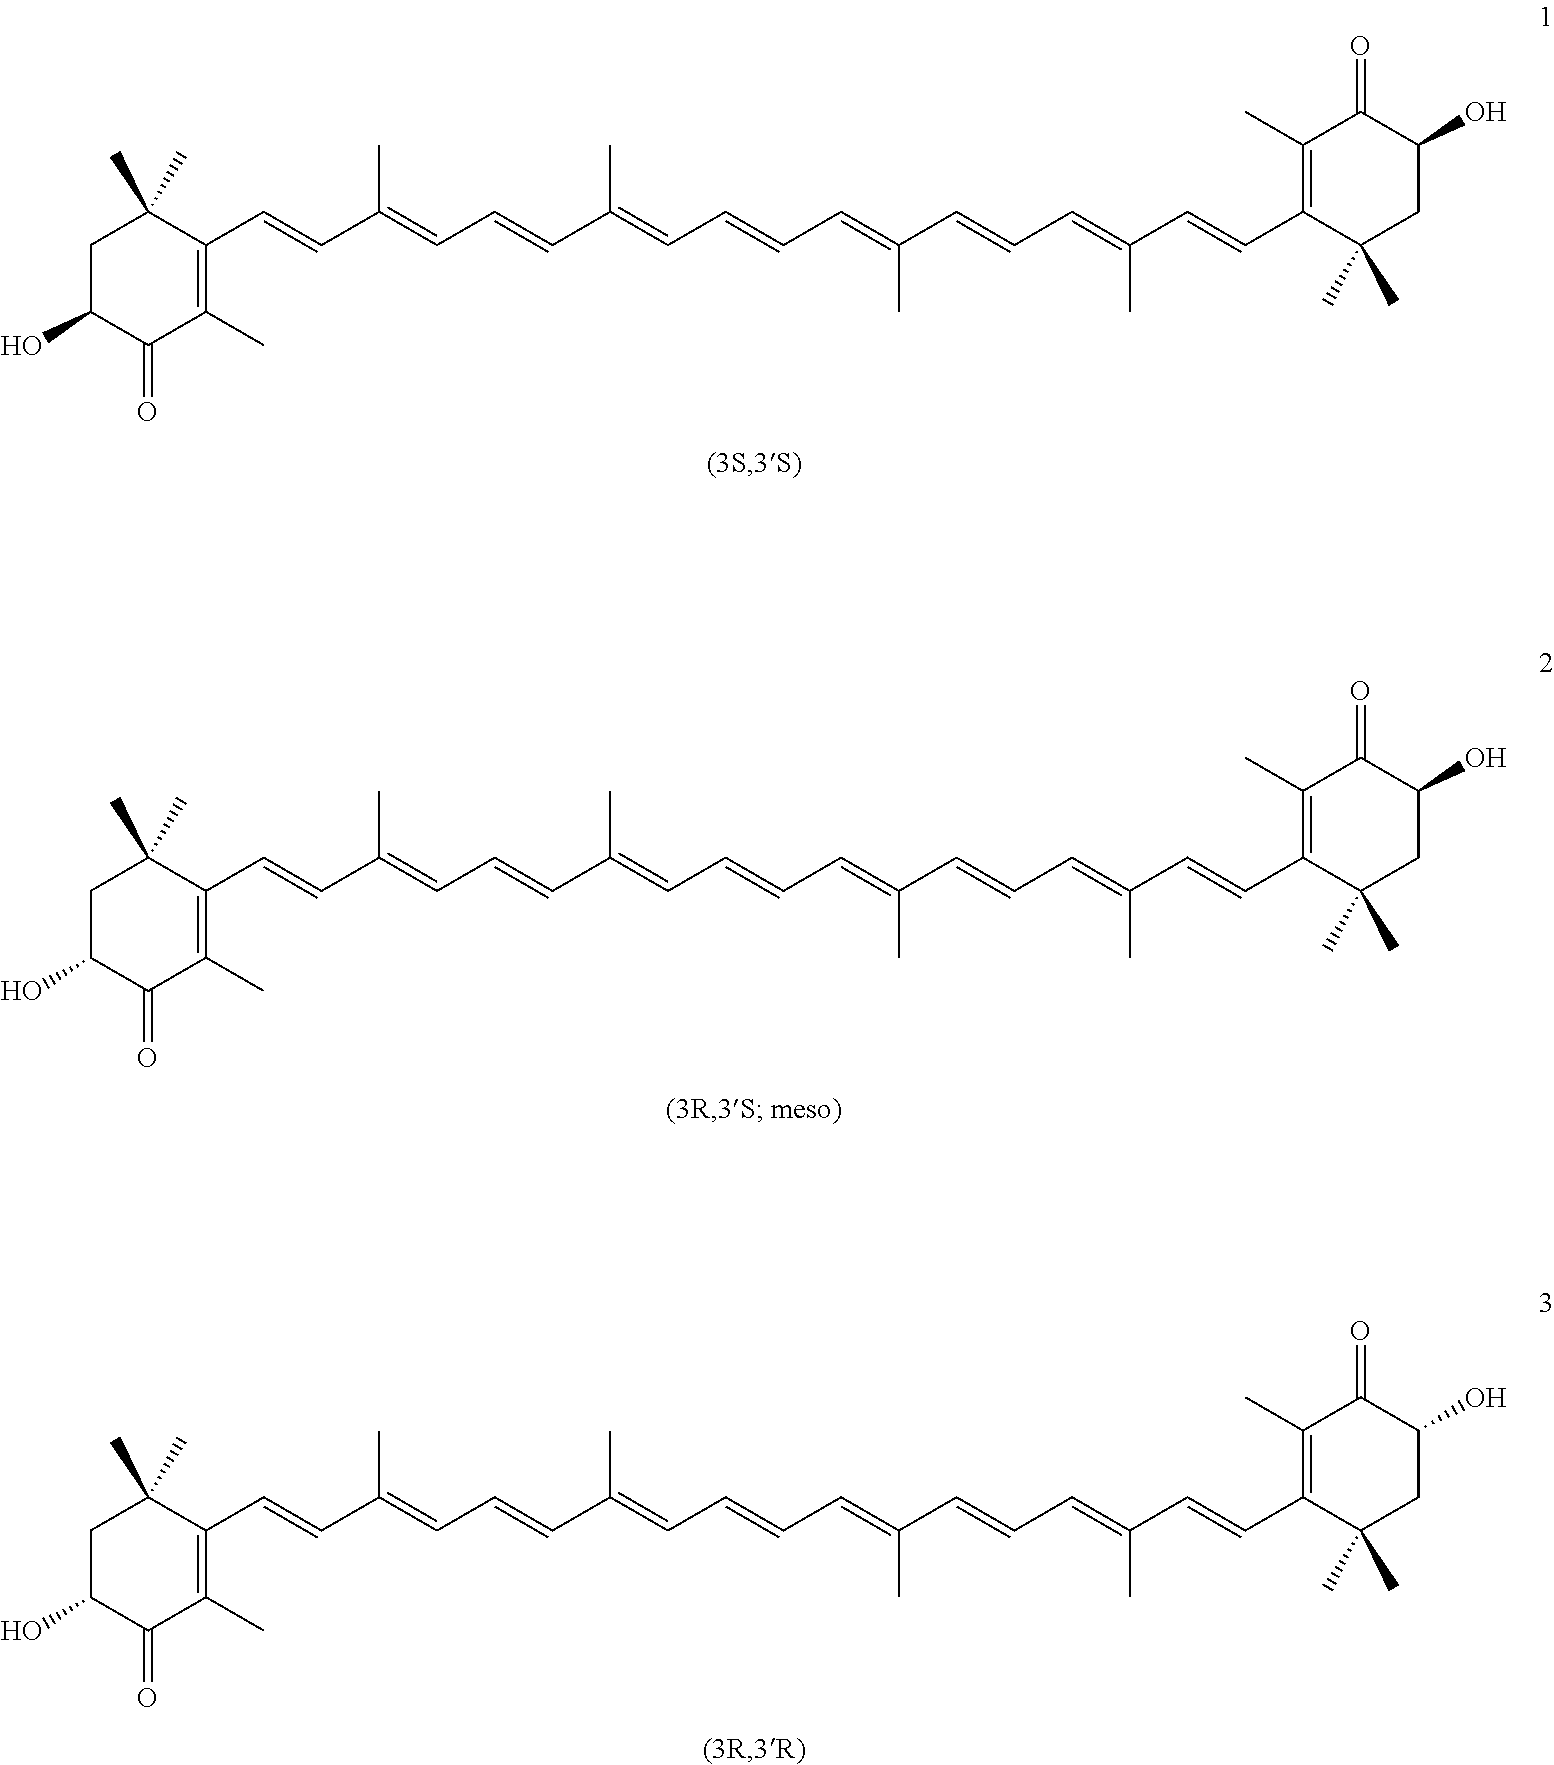 Carotenoid Compound Coming From Plant And Containing Natural Astaxanthin, Preparation Method Therefor, And Composition